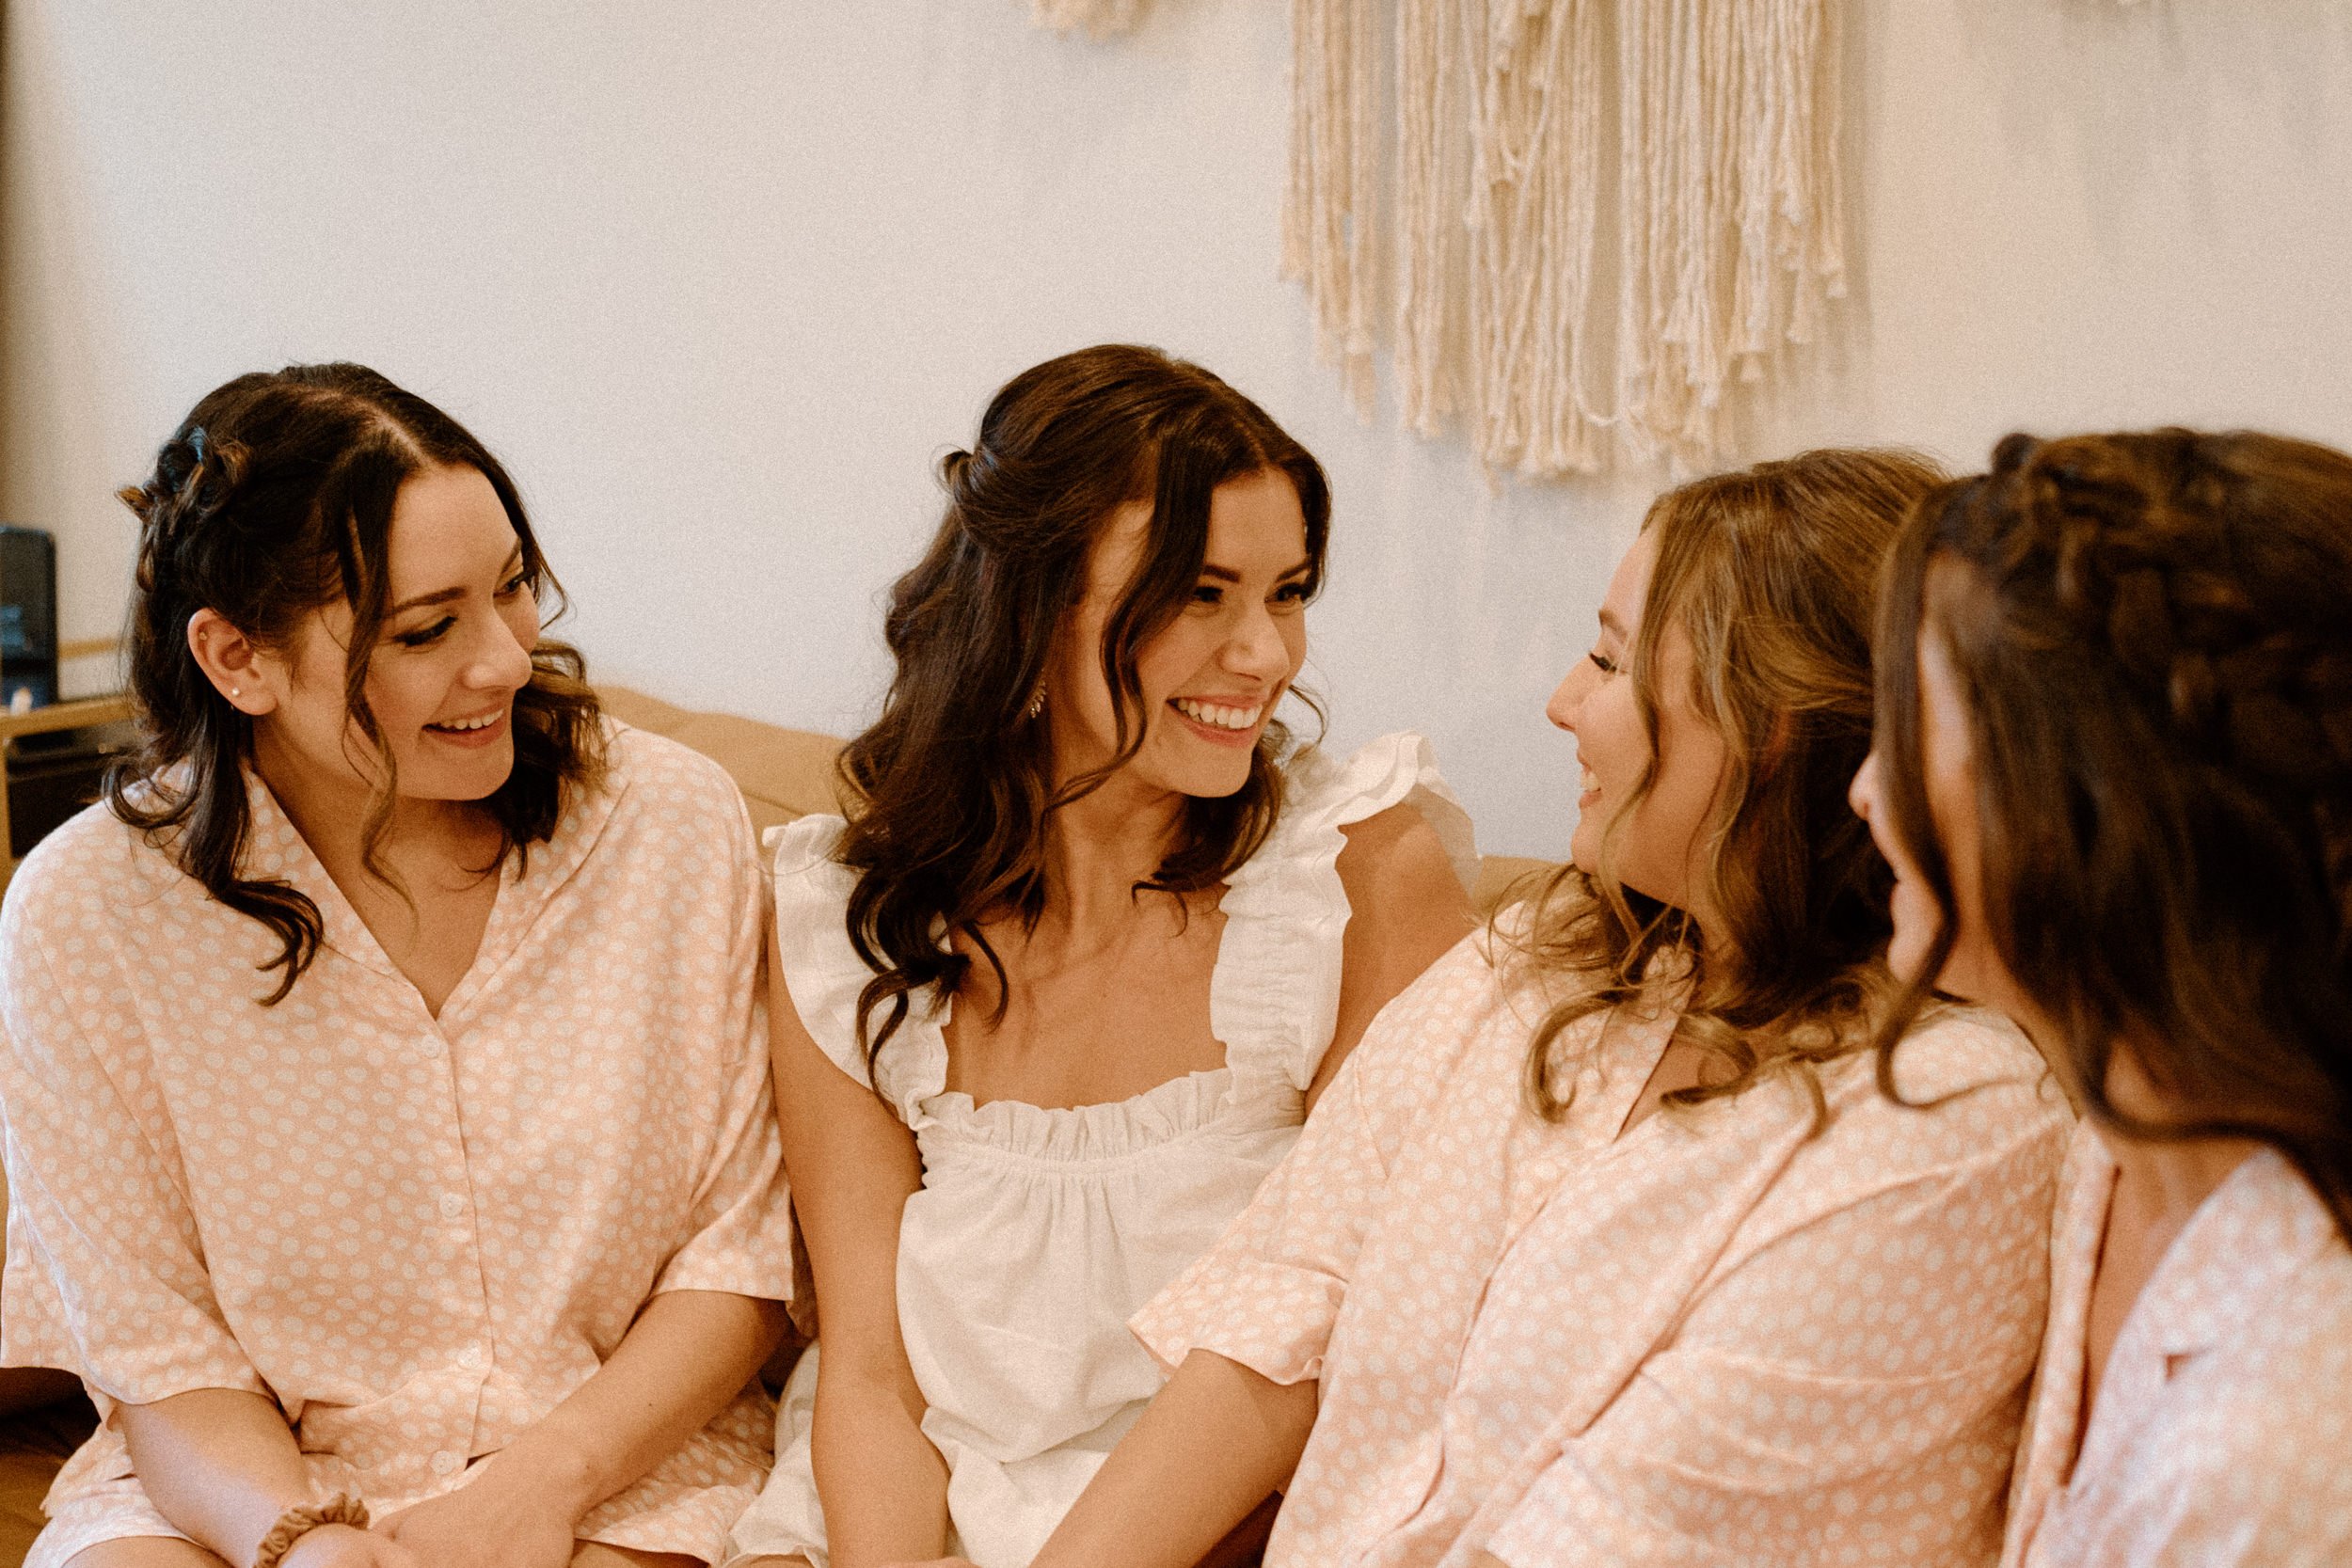 The bride laughs with her bridesmaids as they get ready together